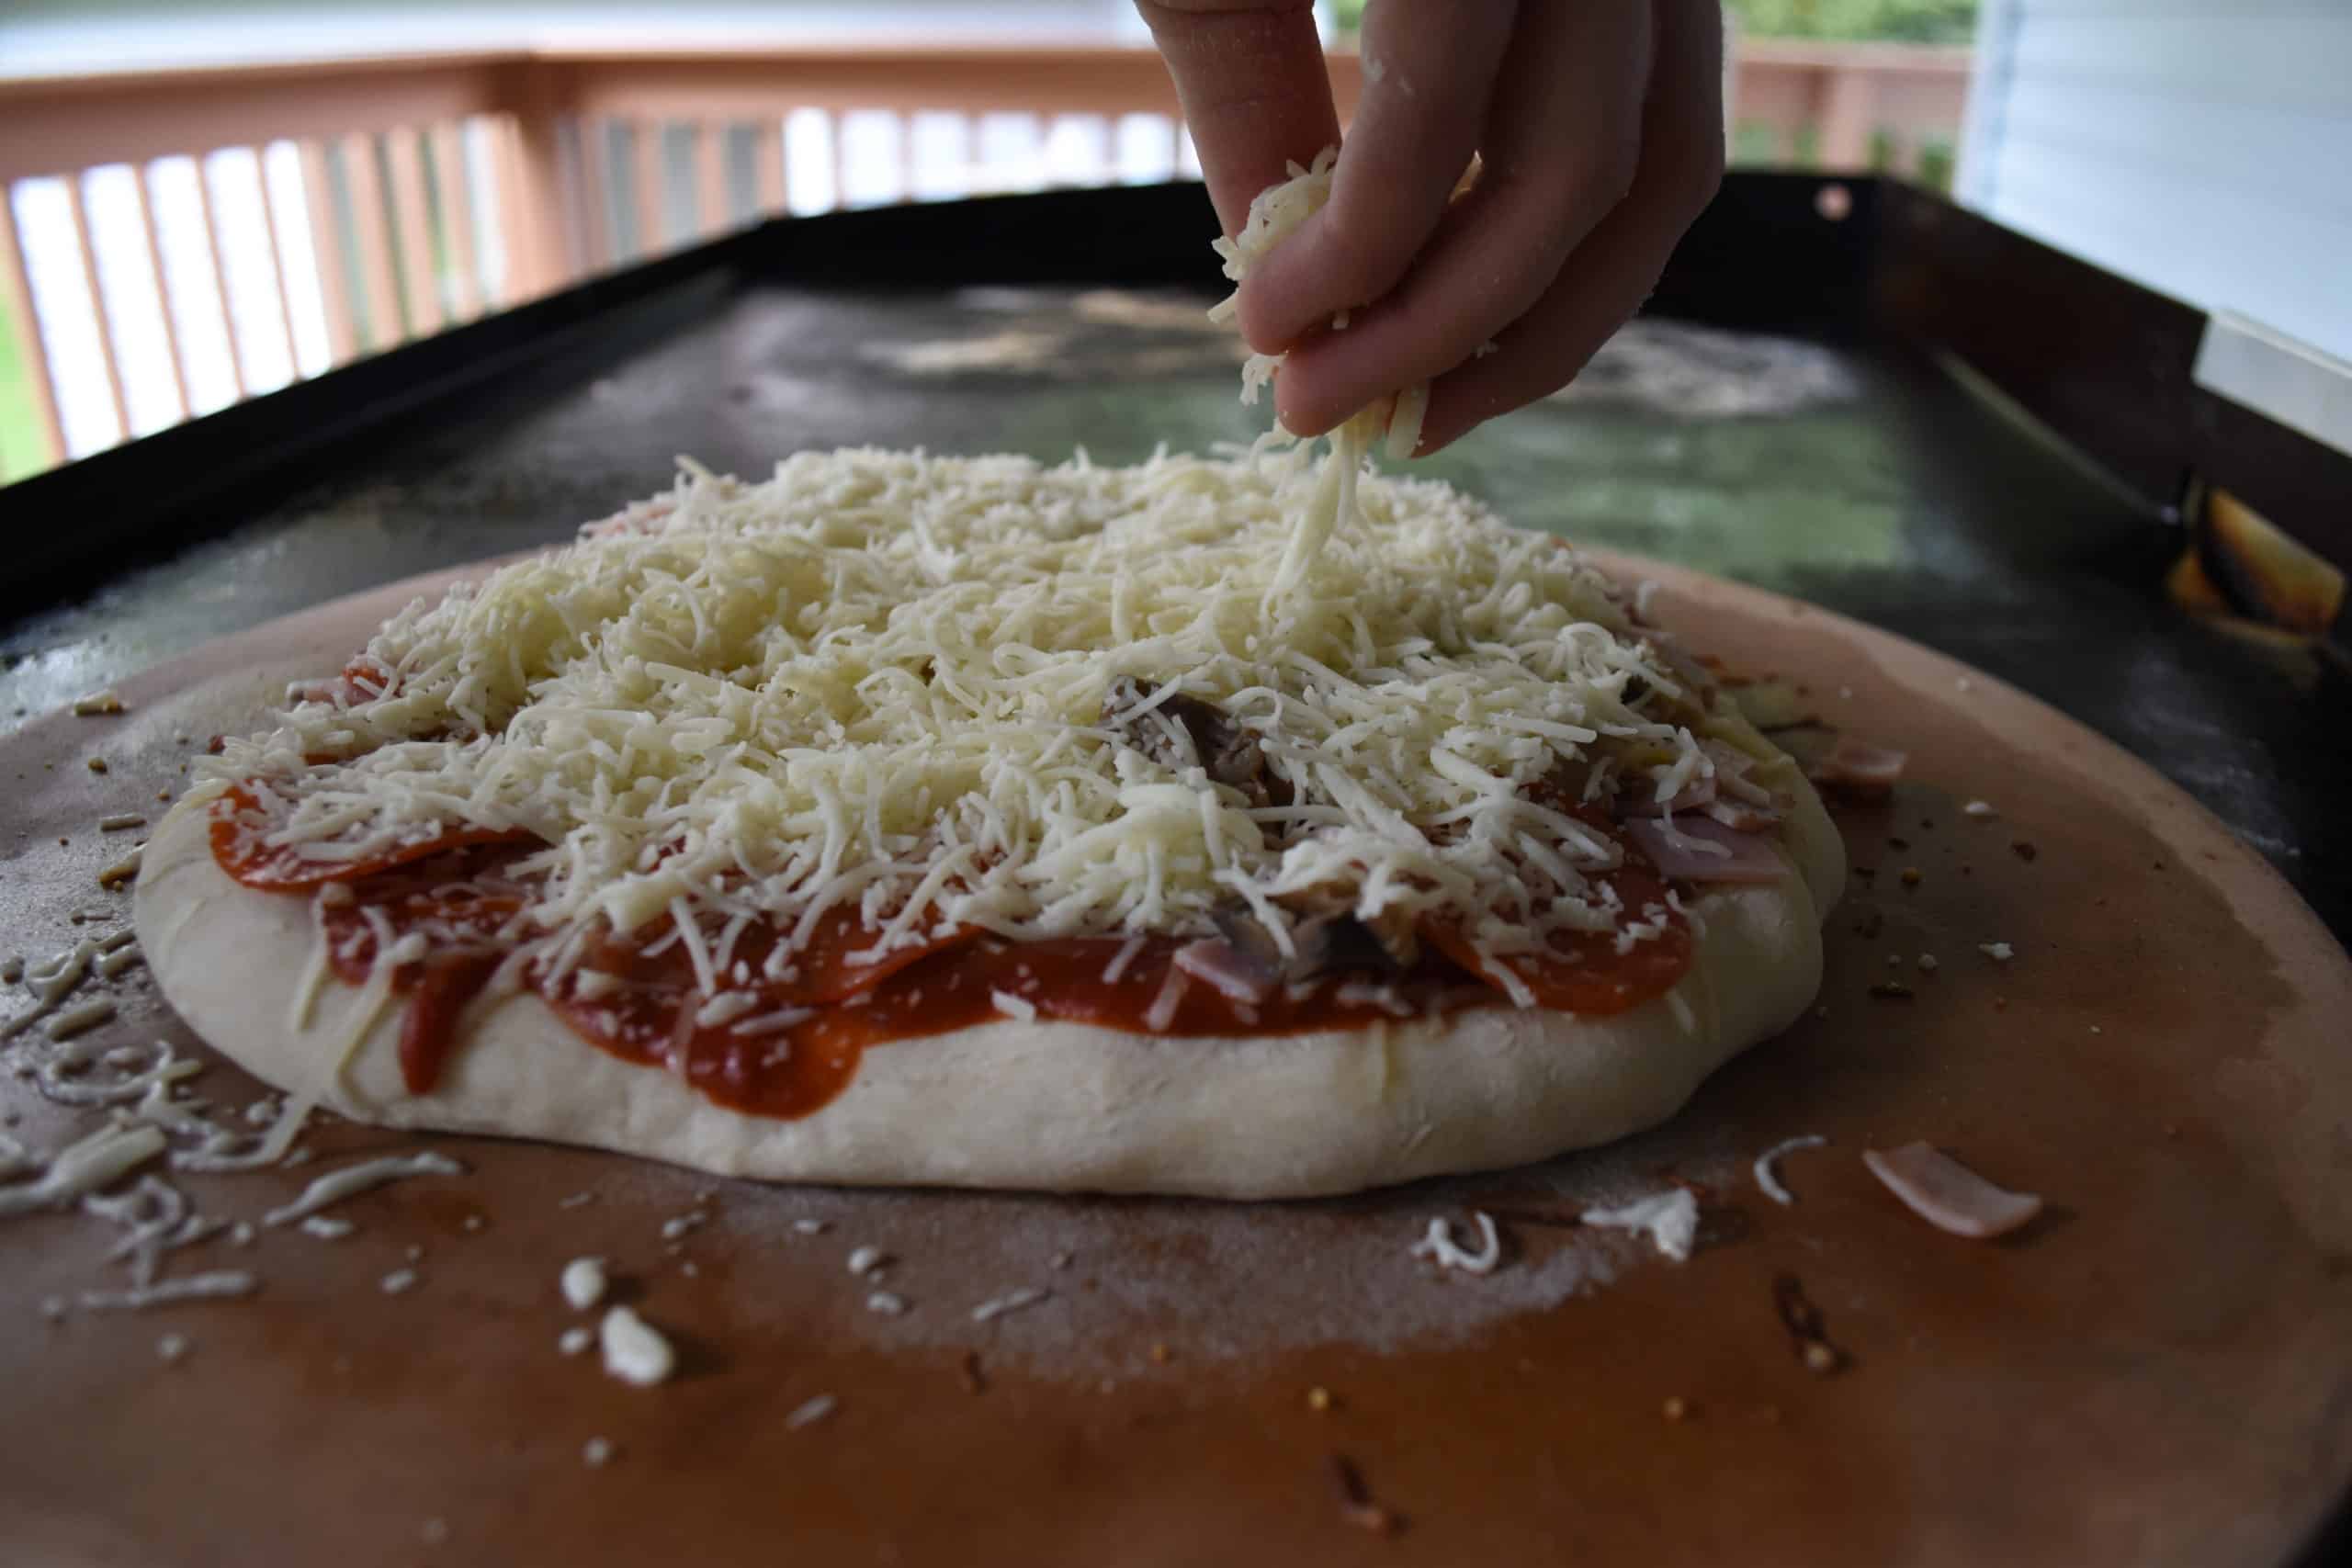 Generously apply shredded cheese to the top of your pizza.